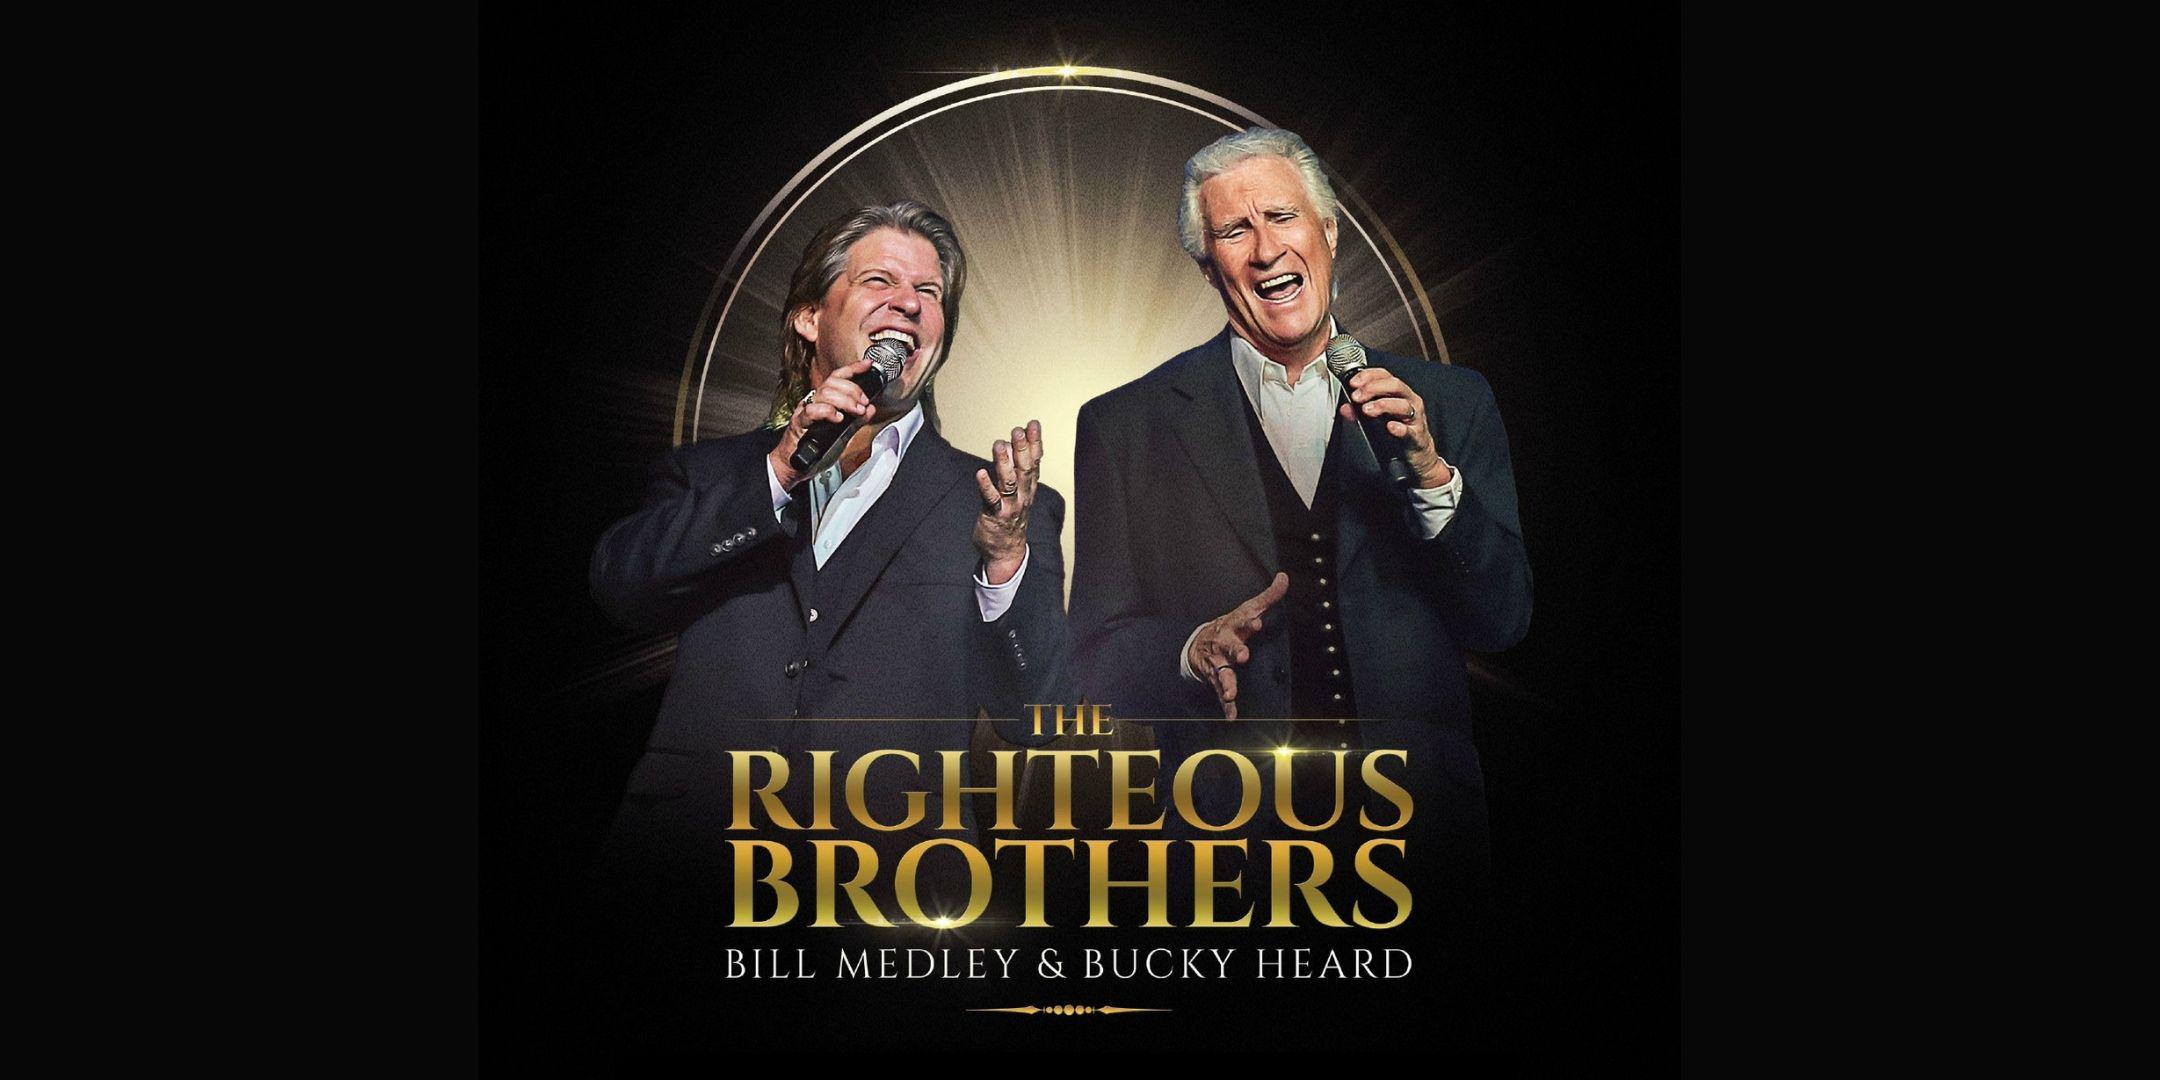 THE RIGHTEOUS BROTHERS BILL MEDLEY & BUCKY HEARD